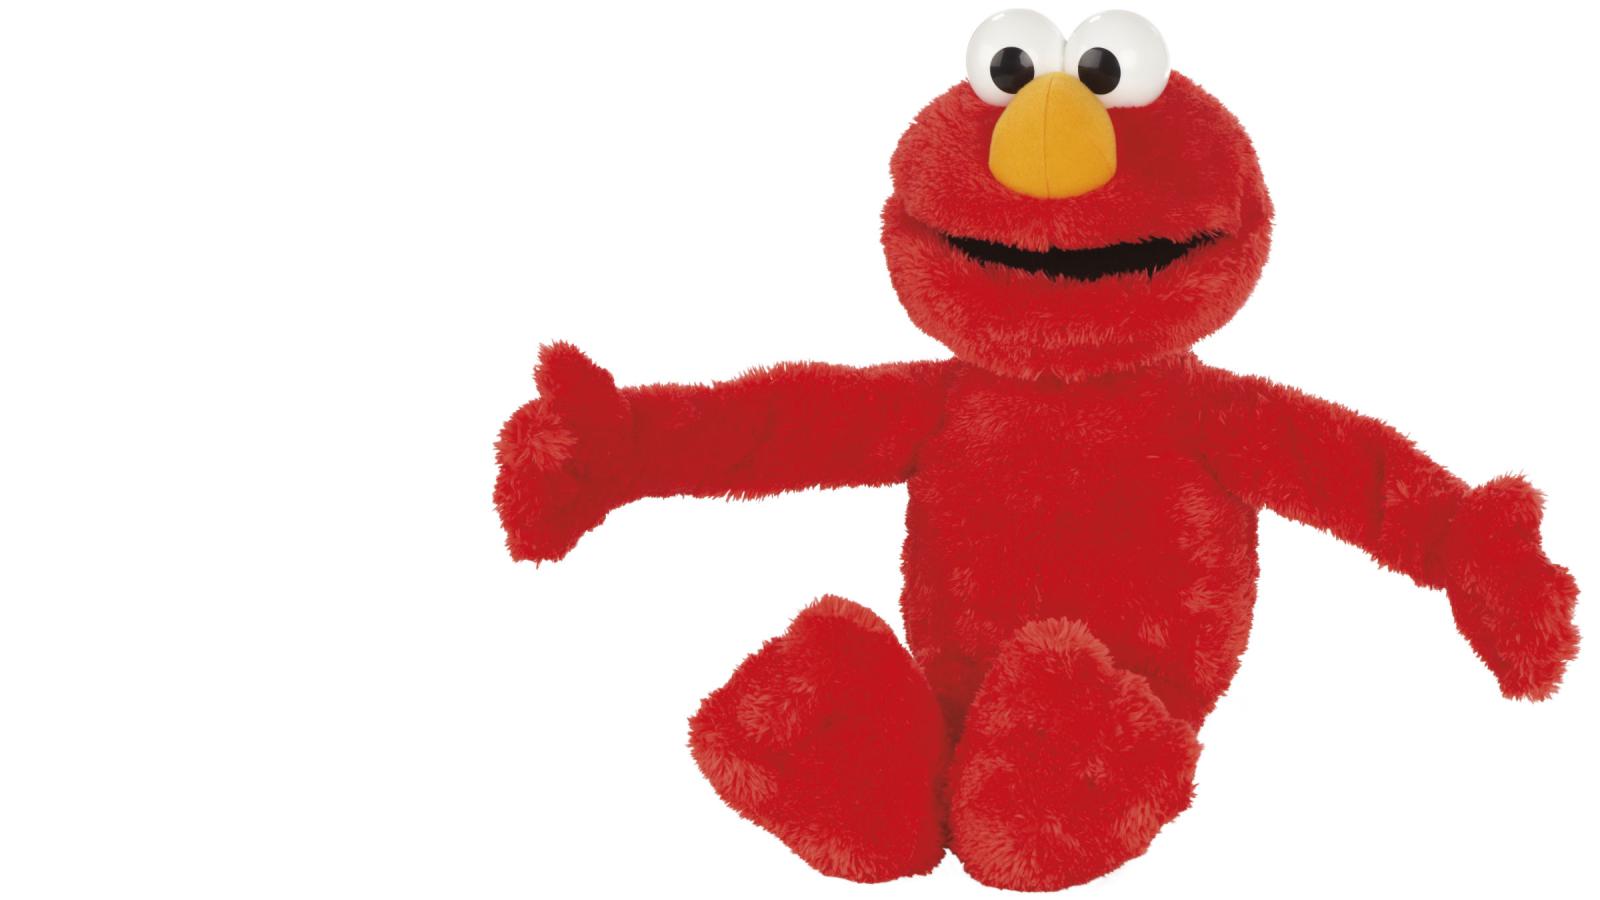 From Tickle Me Elmo to Big Hugs Elmo: nearly two decades